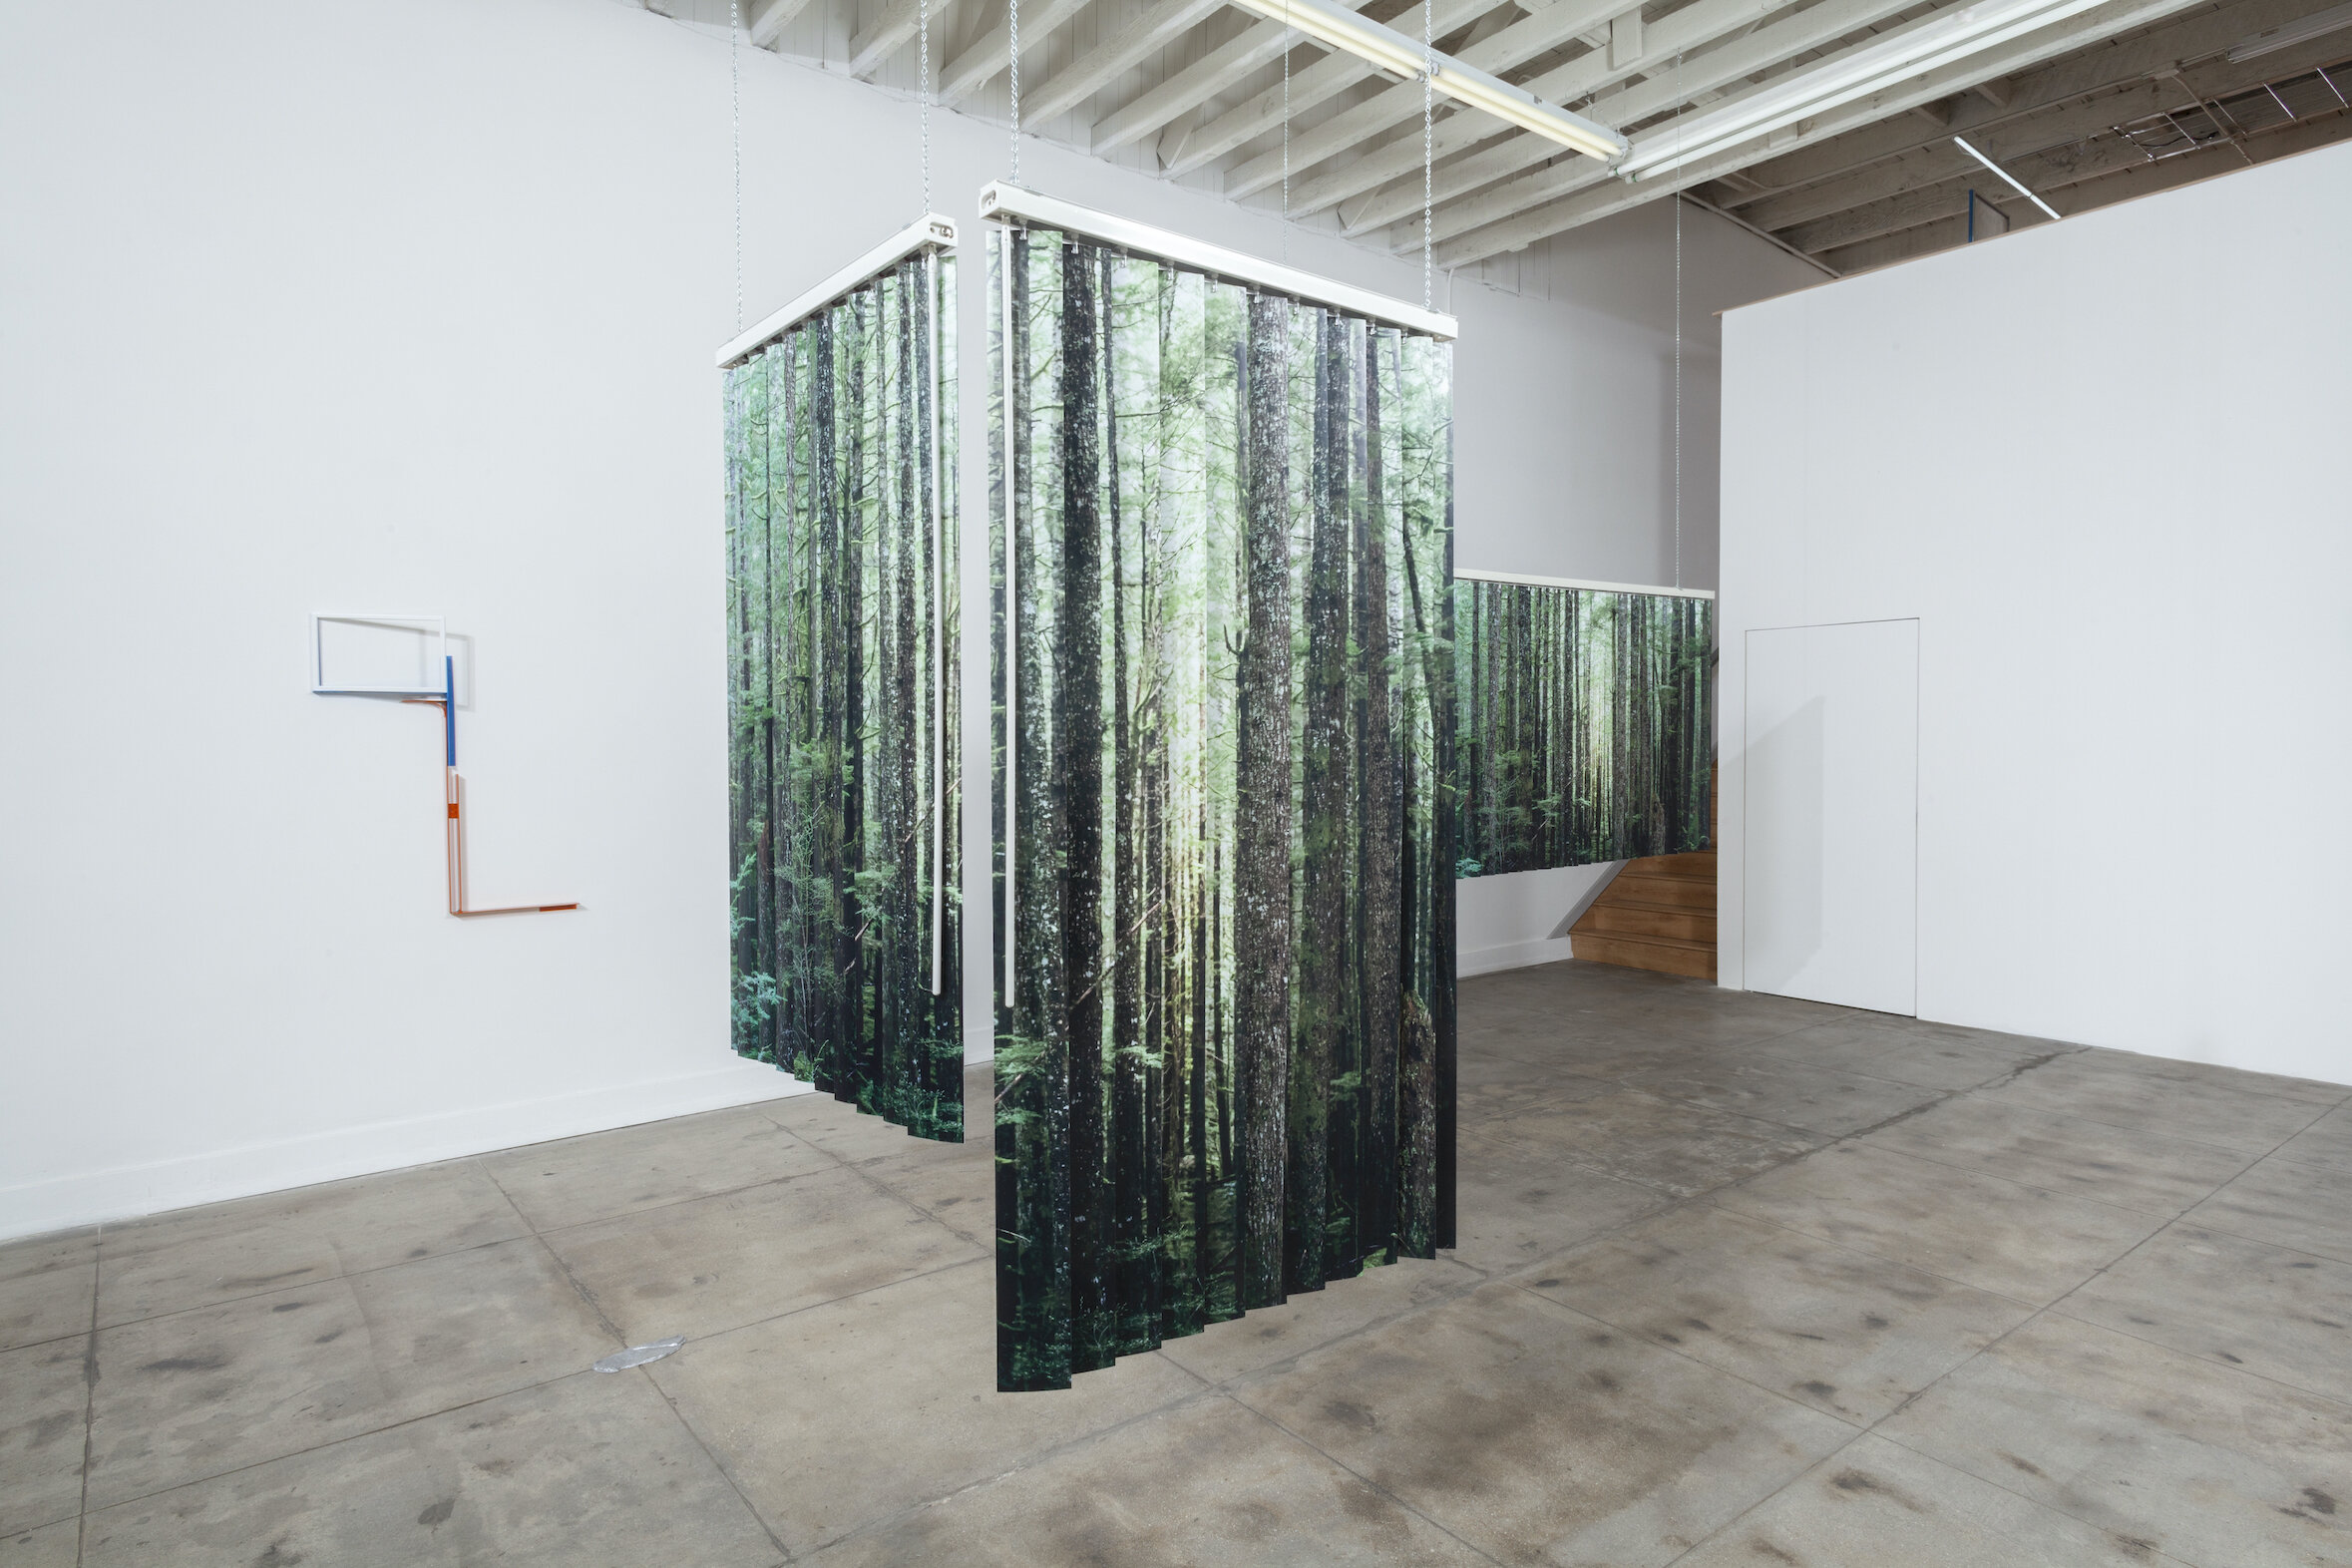   A wide and view of a dense forest in British Columbia/ Fresh raw meat 2,  2019 Salvaged vertical blinds, vinyl, stock photographs, 31 x 56 x 3 1⁄2 inches 